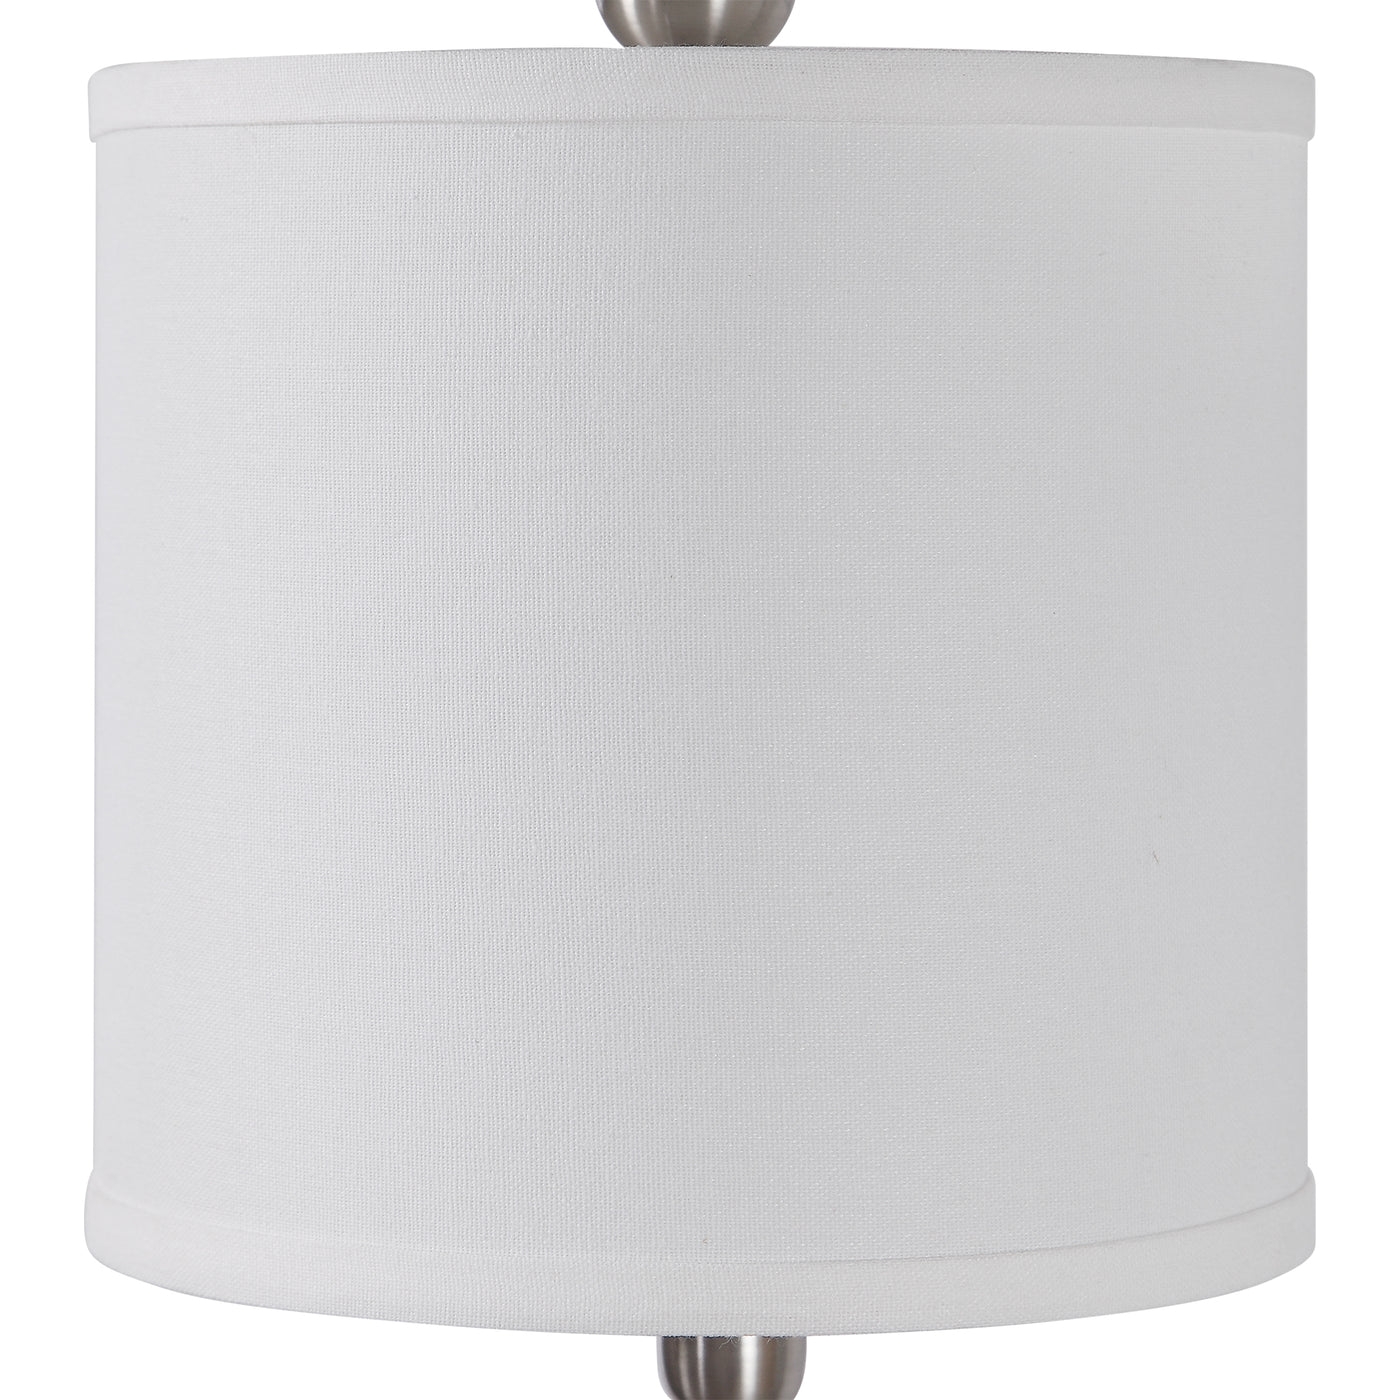 This Versatile Buffet Lamp Features Smooth Iron Details Finished In A Plated Brushed Nickel, Accented With A Thick Crystal...